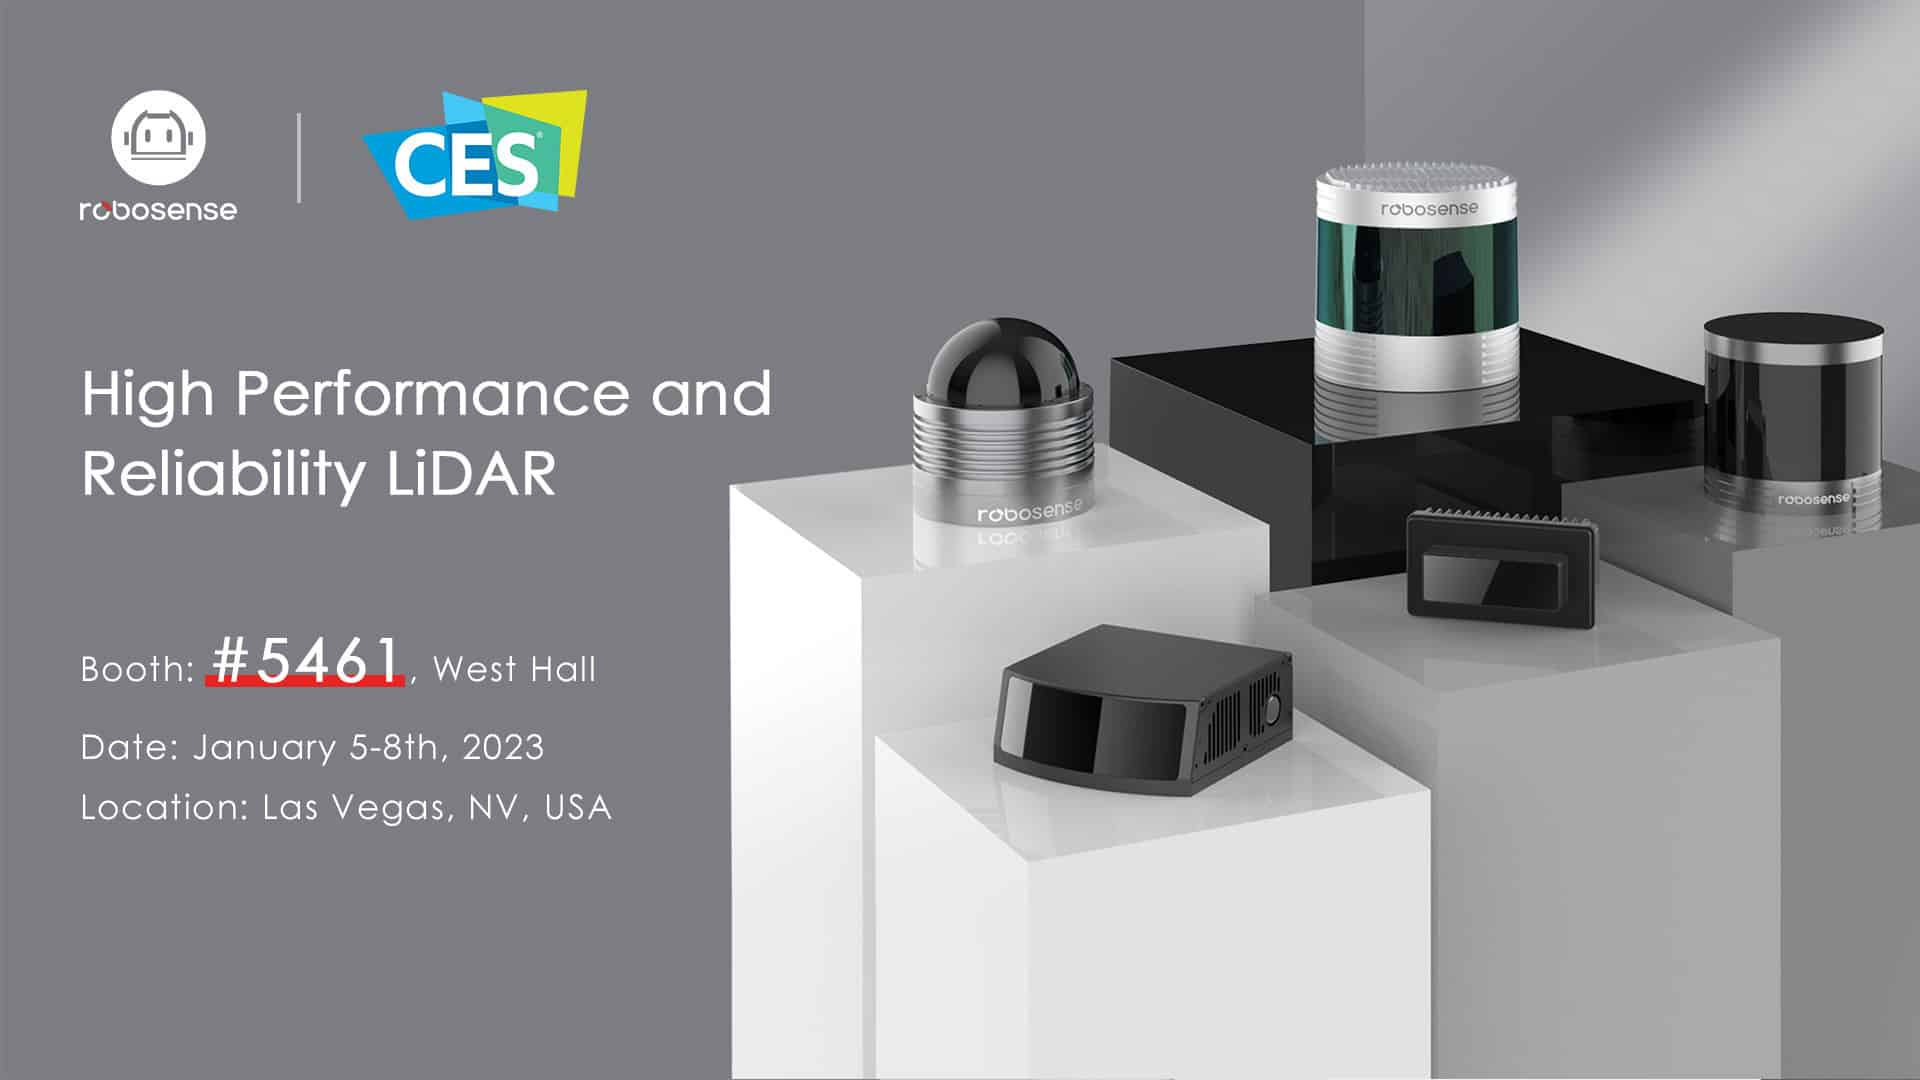 RoboSense at CES 2023丨Meet the LiDAR provider with the most awarded vehicles